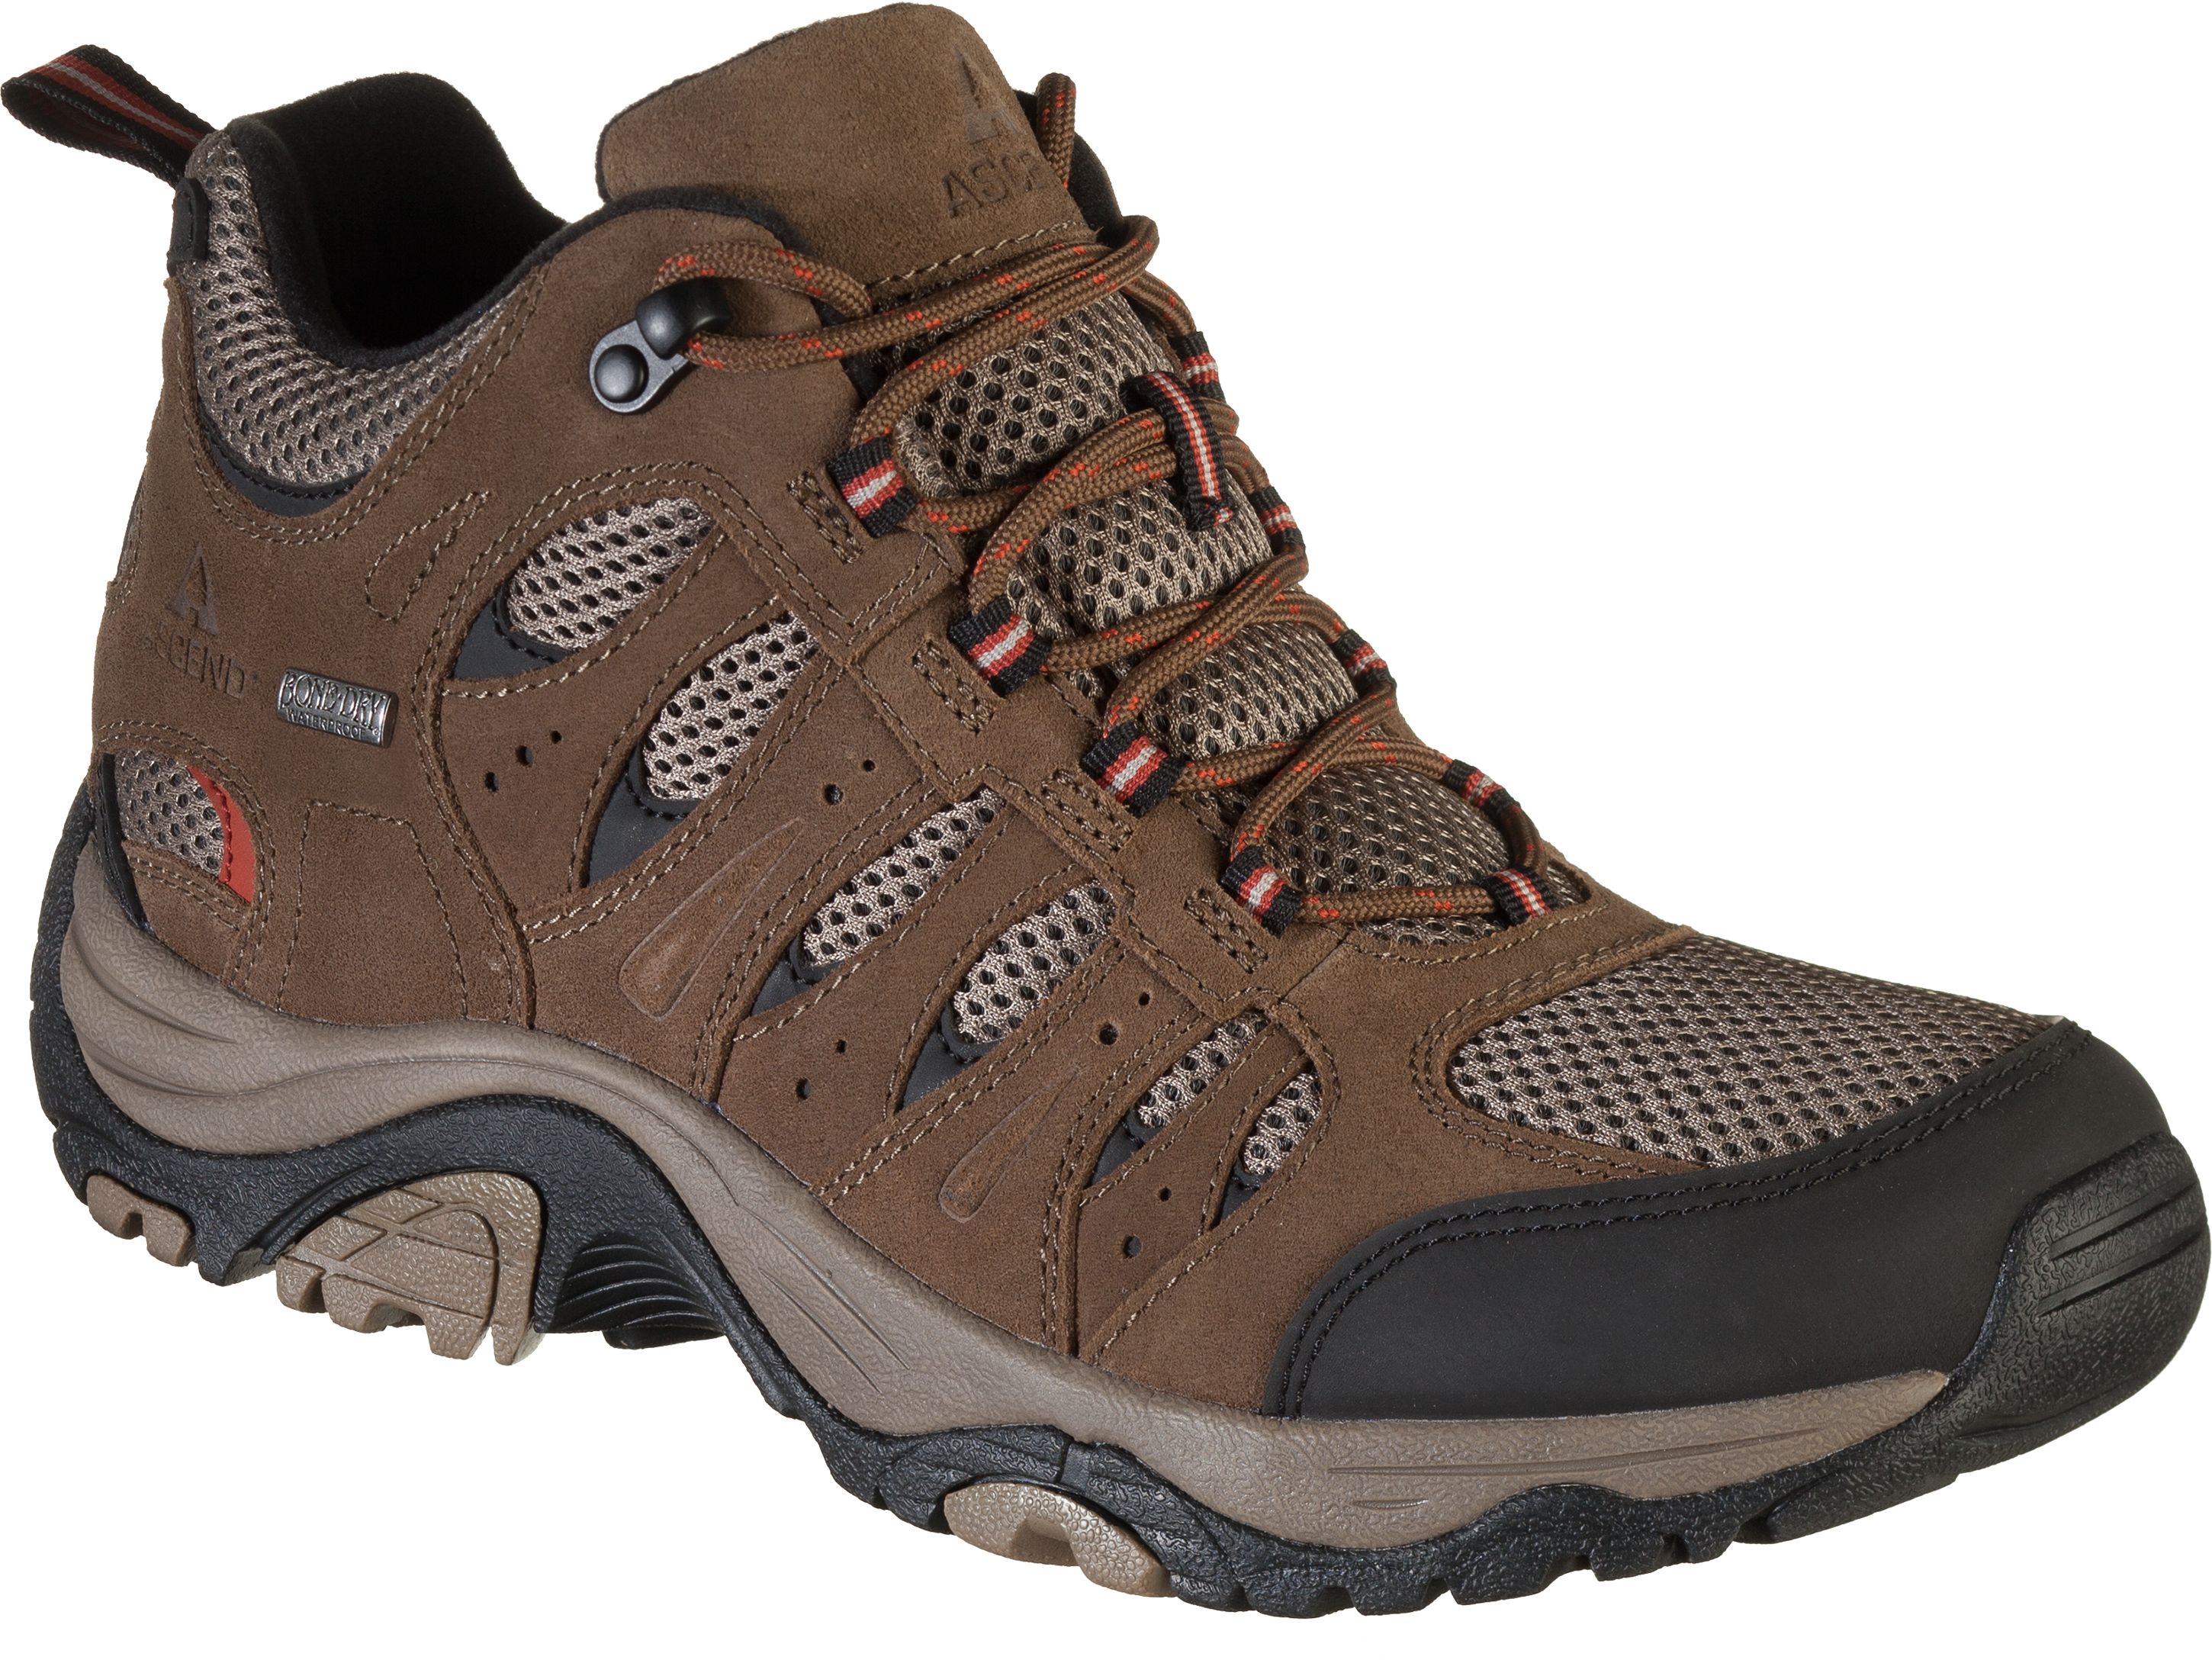 Ascend Lisco Mid Waterproof Hiking Boots for Men - Chocolate - 11.5M